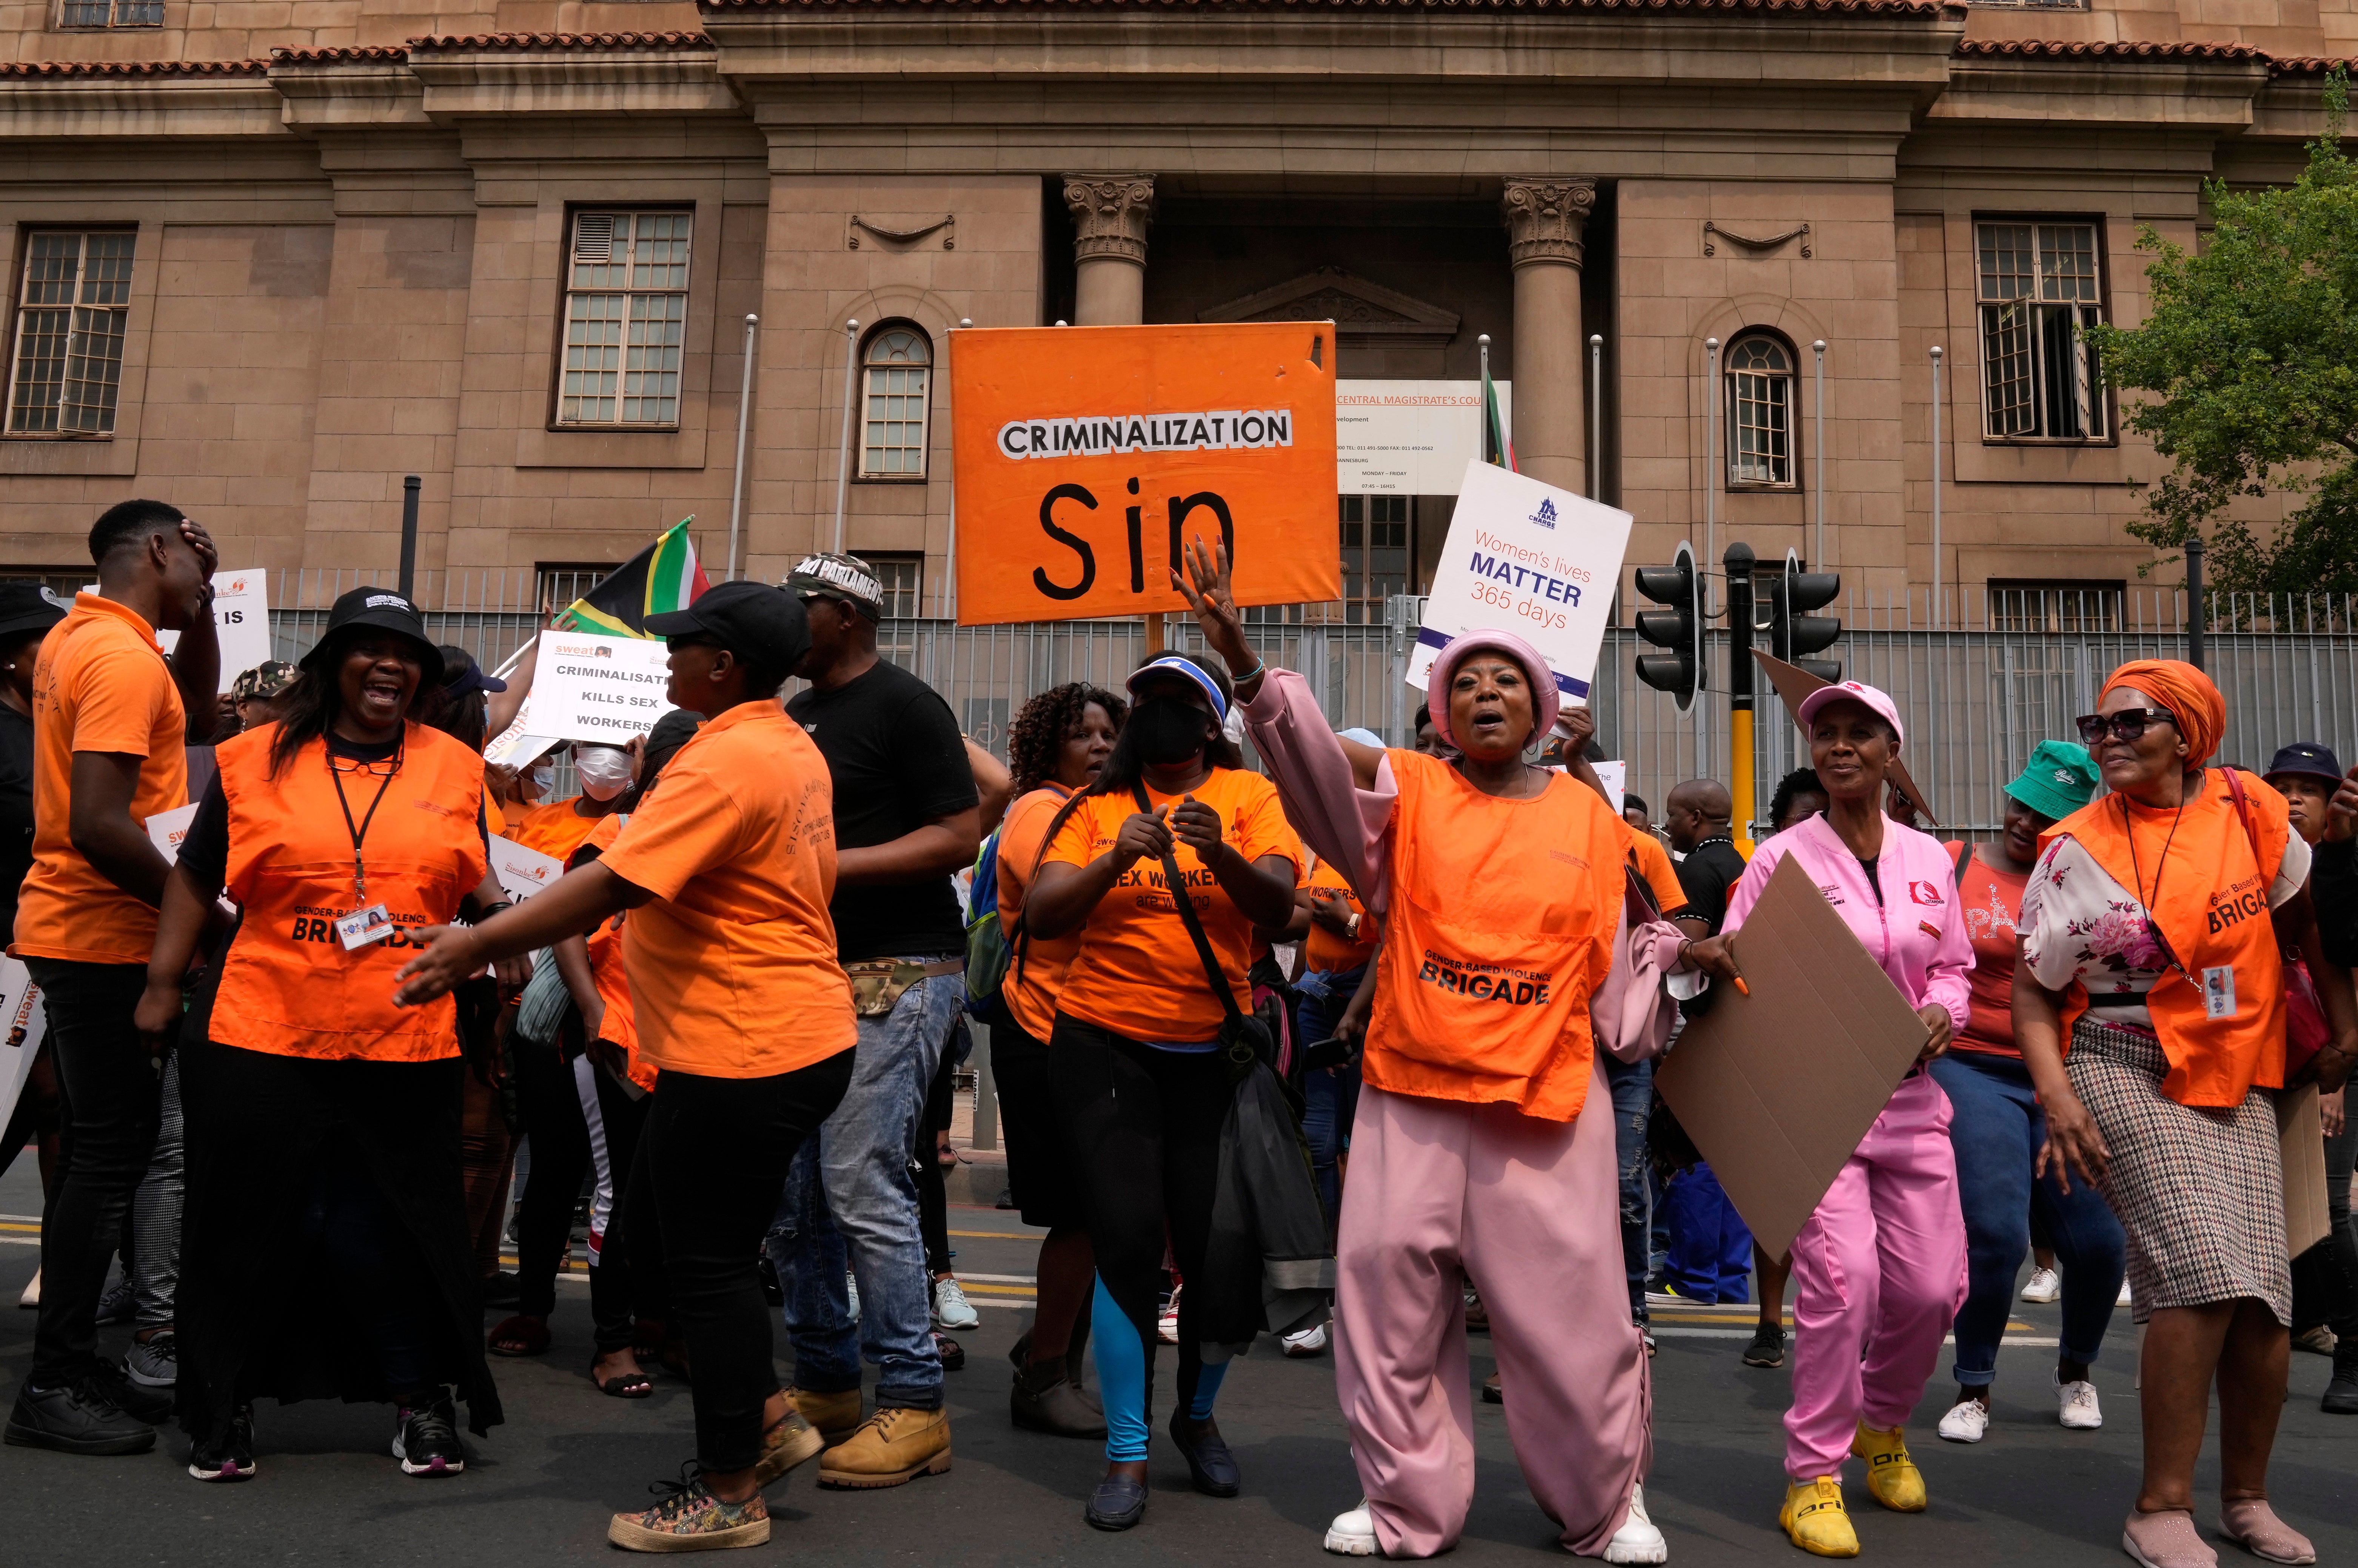 South African women's rights groups and sex workers demonstrate outside the magistrate court in Johannesburg